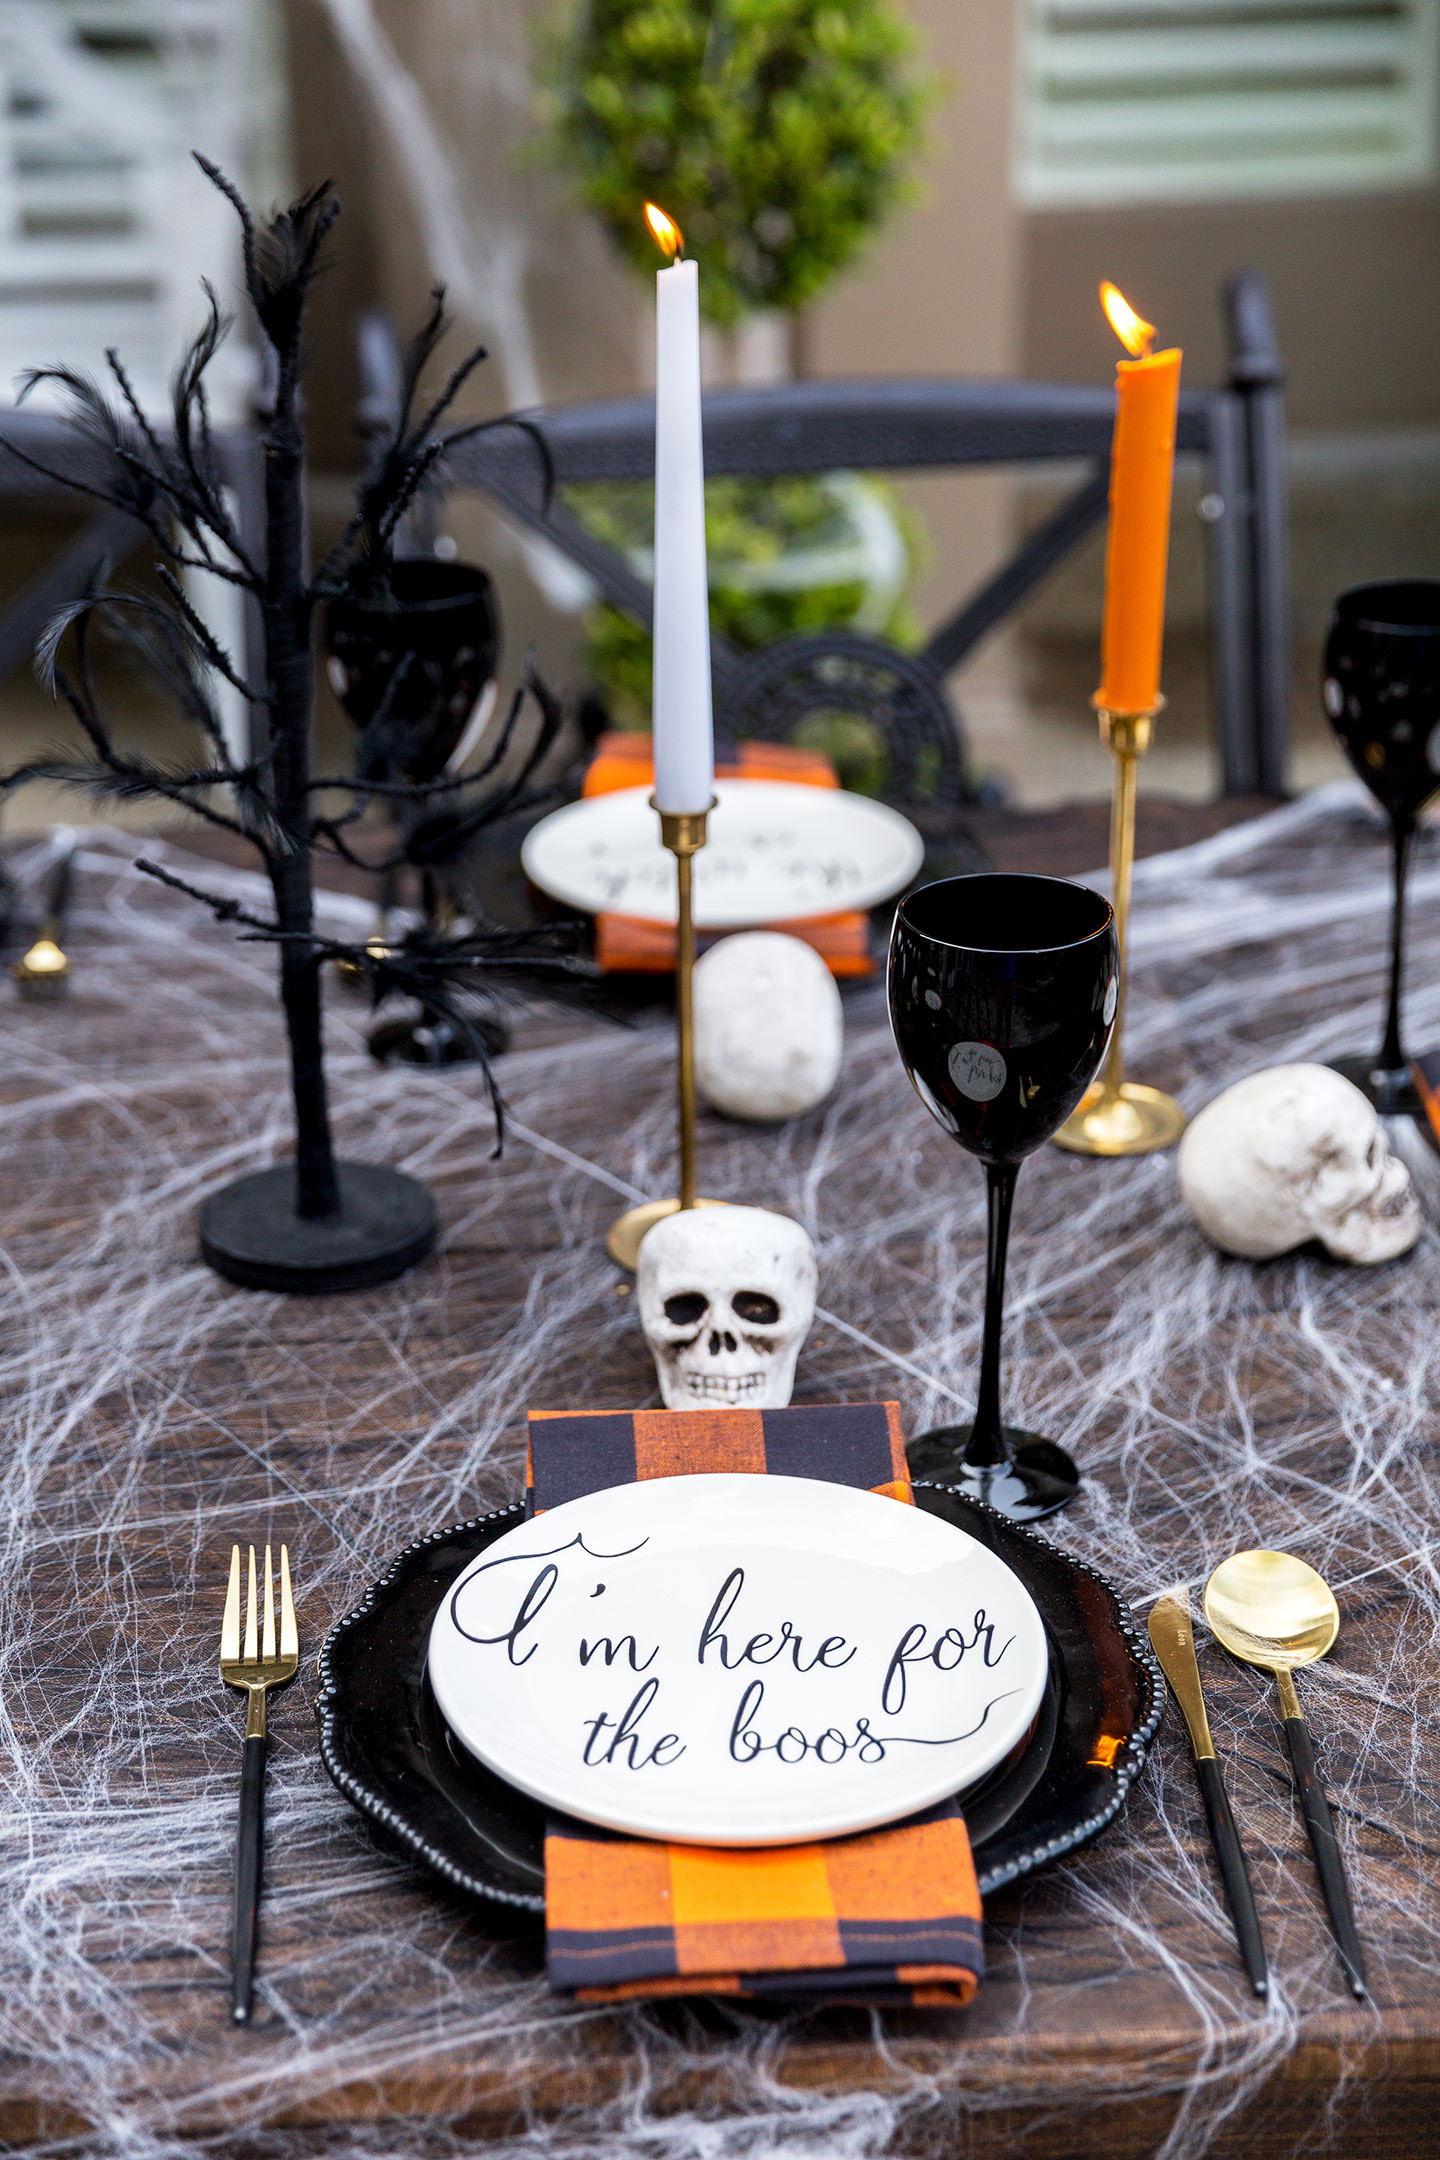 Halloween Party Decorations Ideas
 Adult Halloween Party Decorations & Halloween Menu Ideas